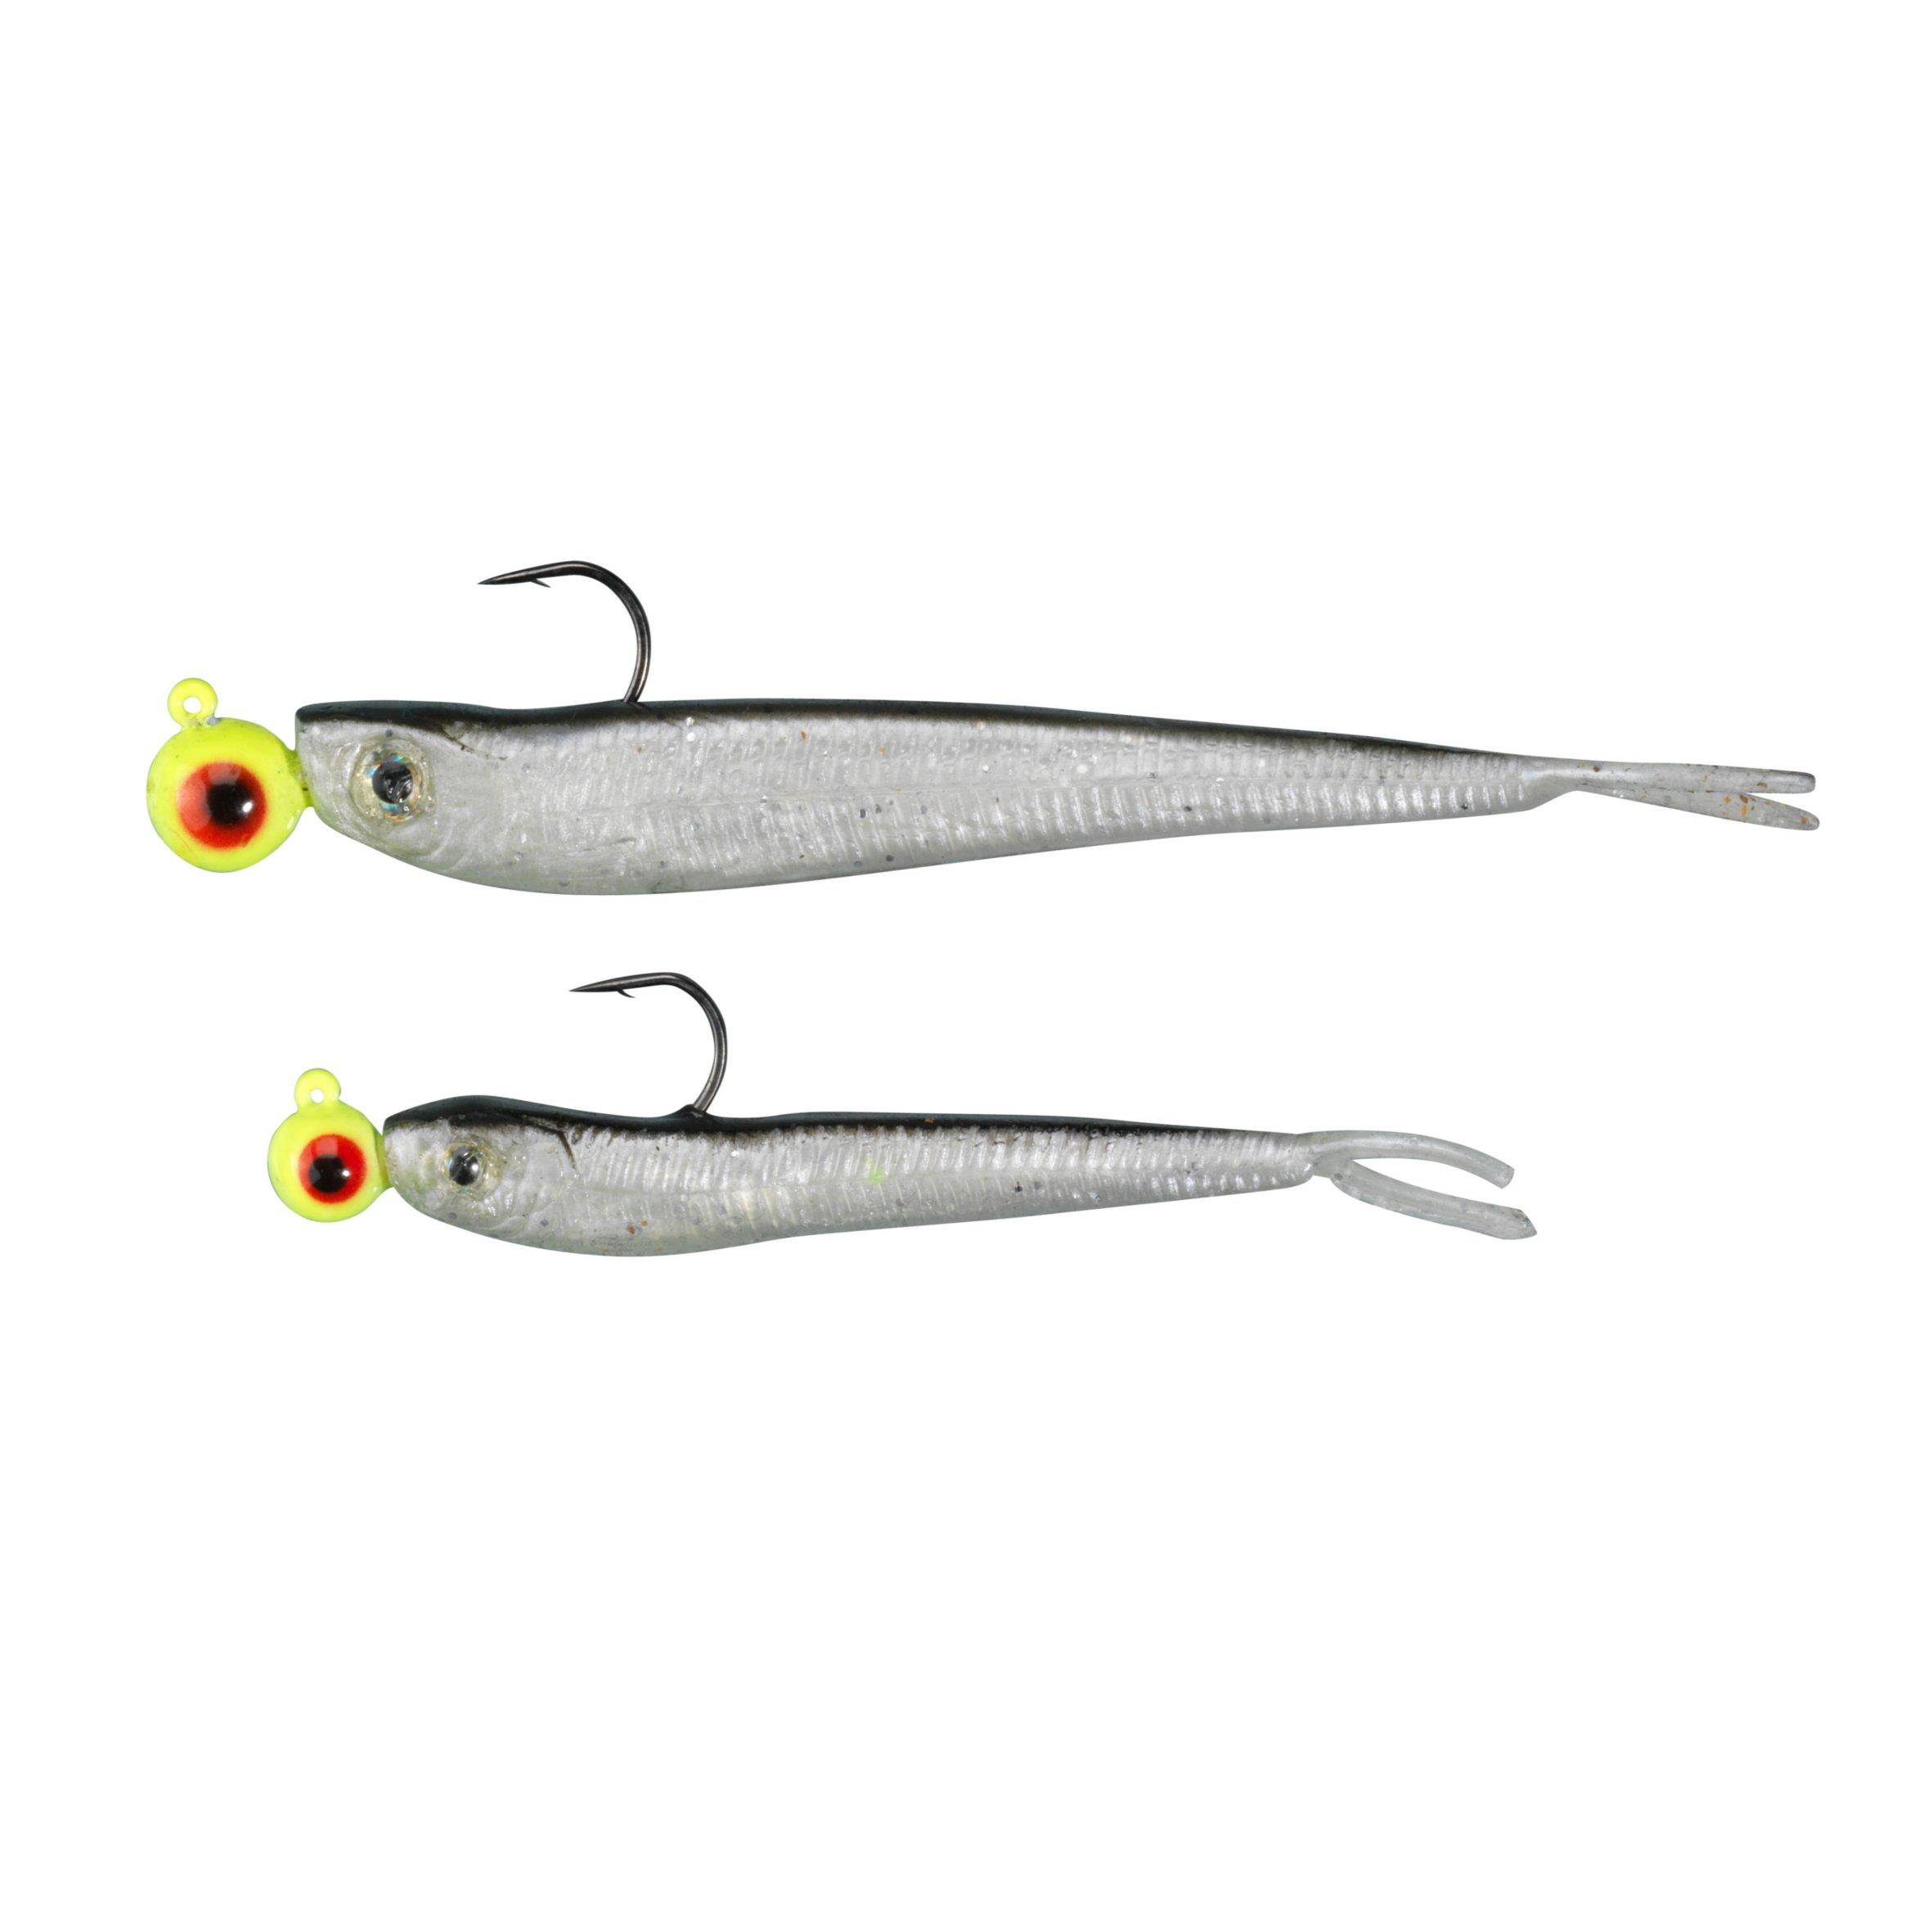 NO BRAND POWER PACK BLACK SHAD FRESHWATER SOFT LURES